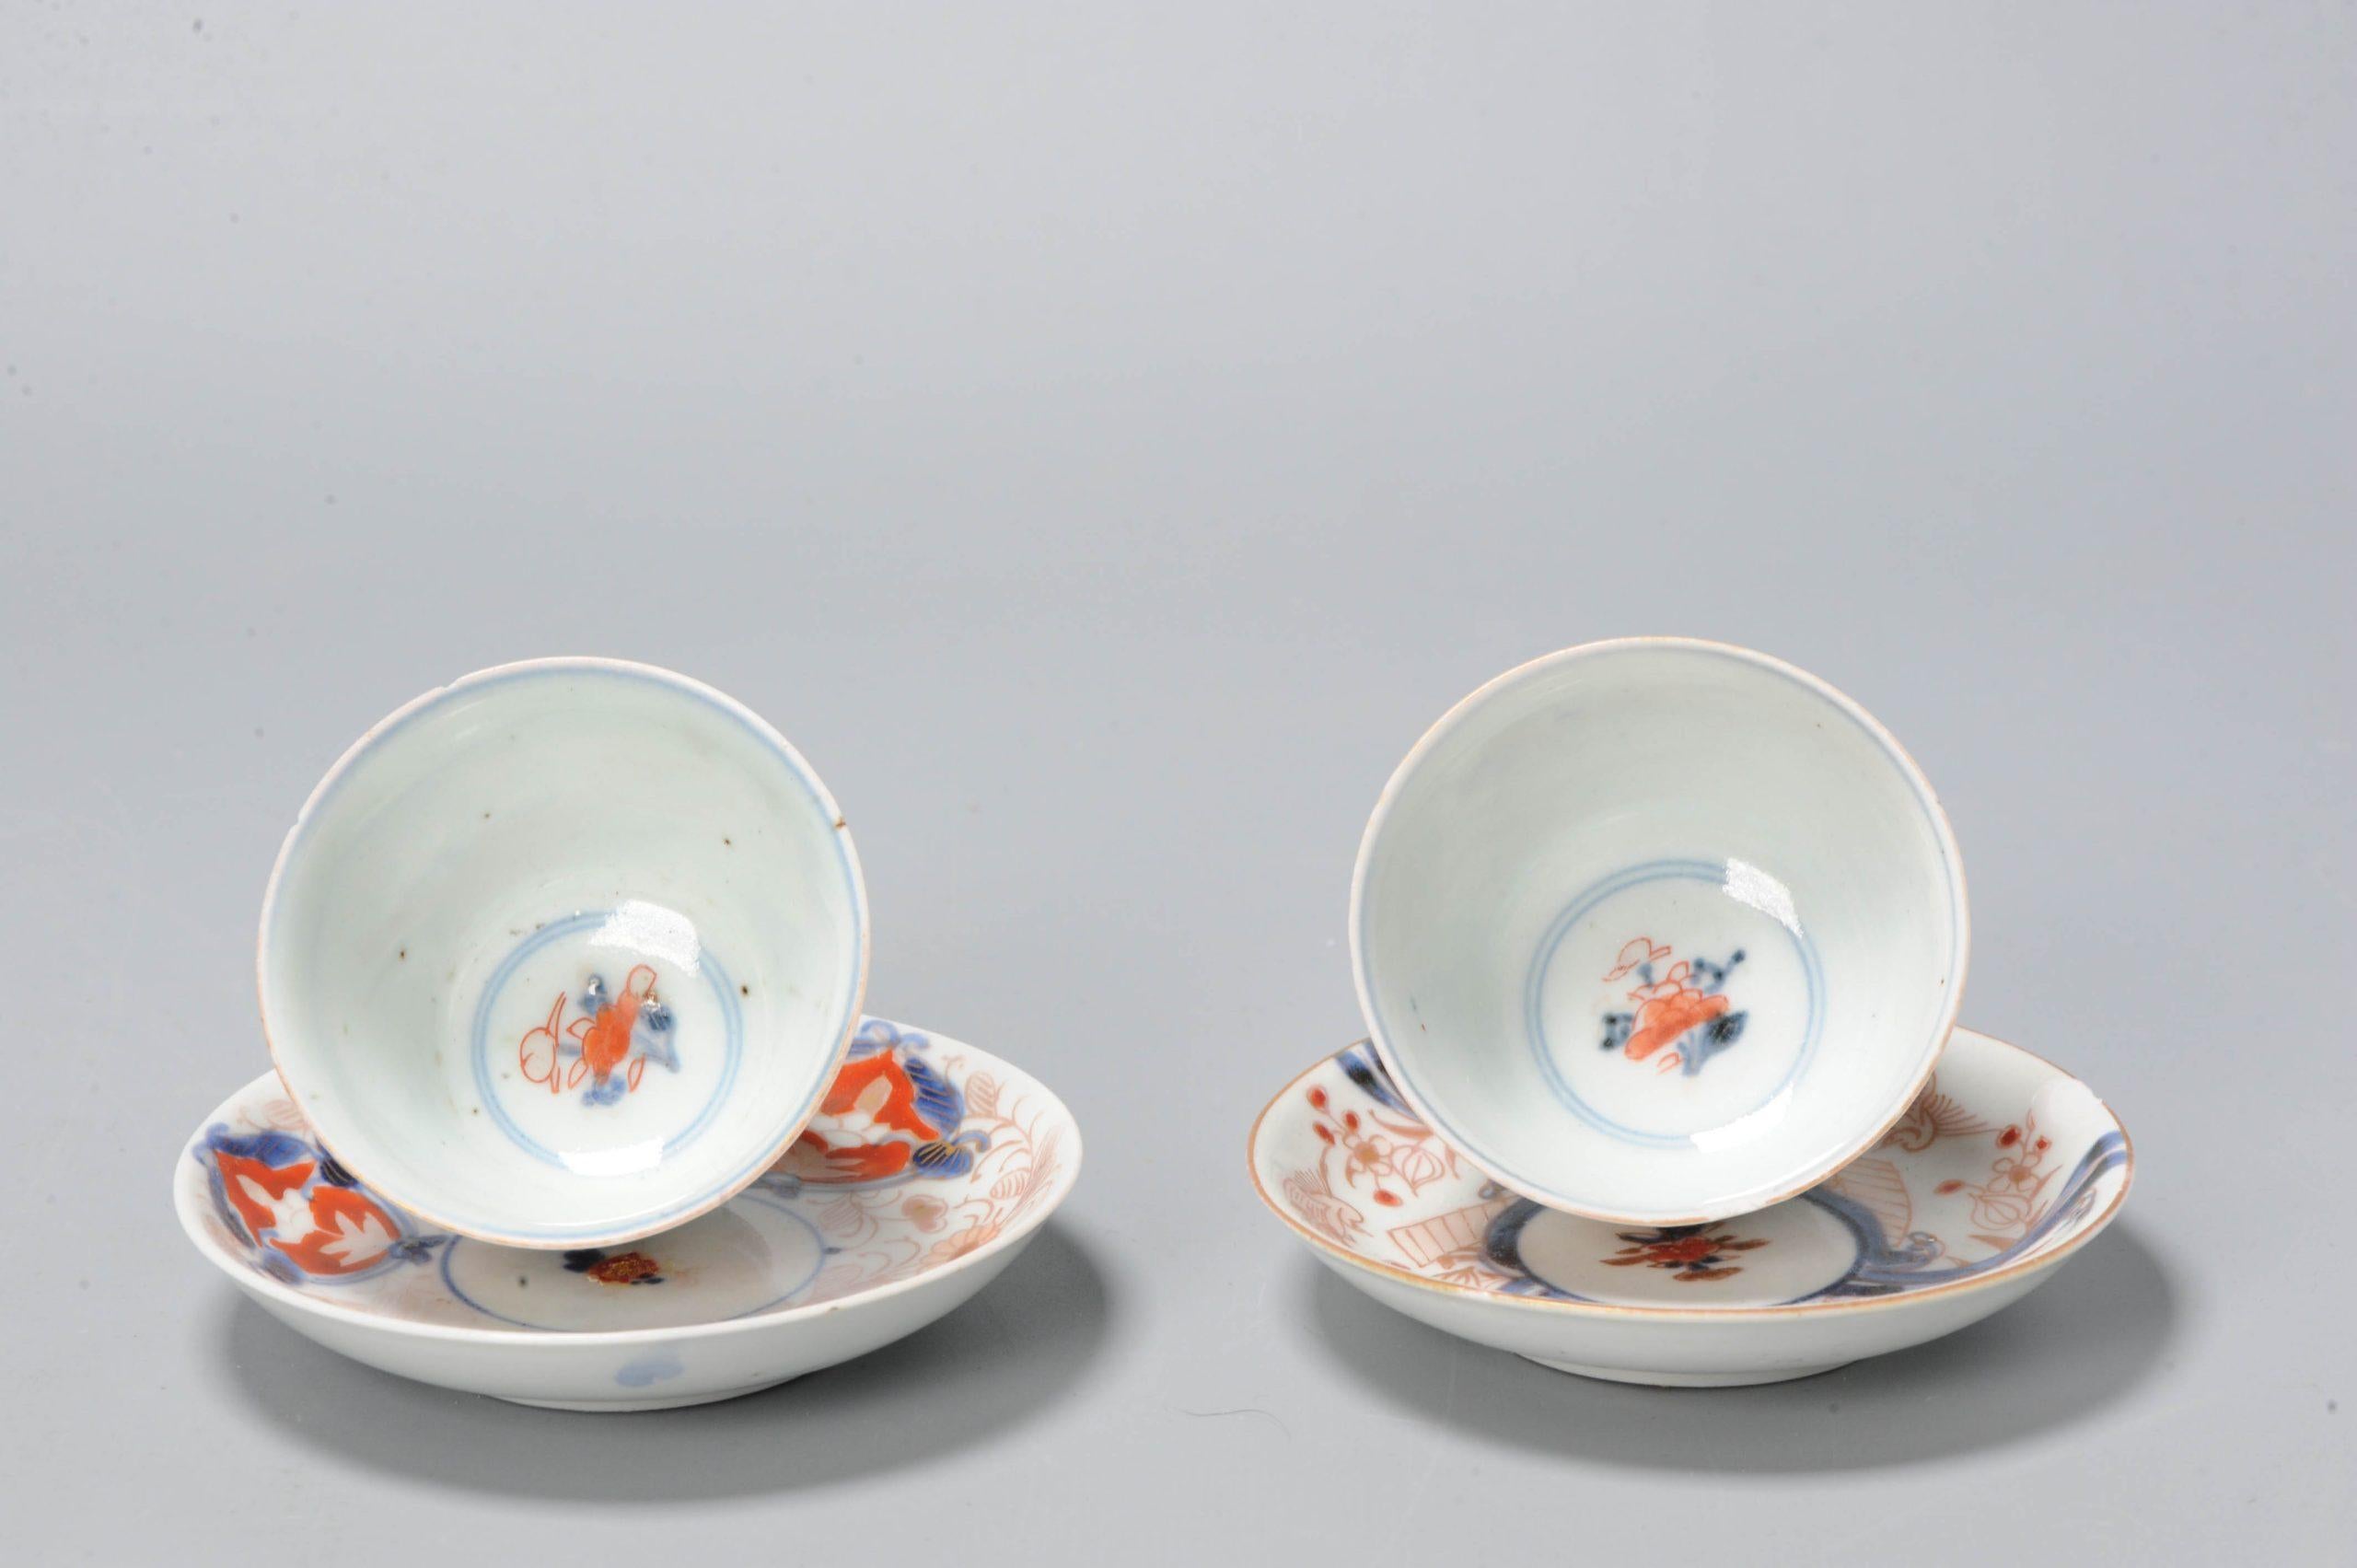 A Set of 2 Japanese Edo Period Gold Imari Porcelain Tea Bowl & Saucer Japan In Good Condition For Sale In Amsterdam, Noord Holland